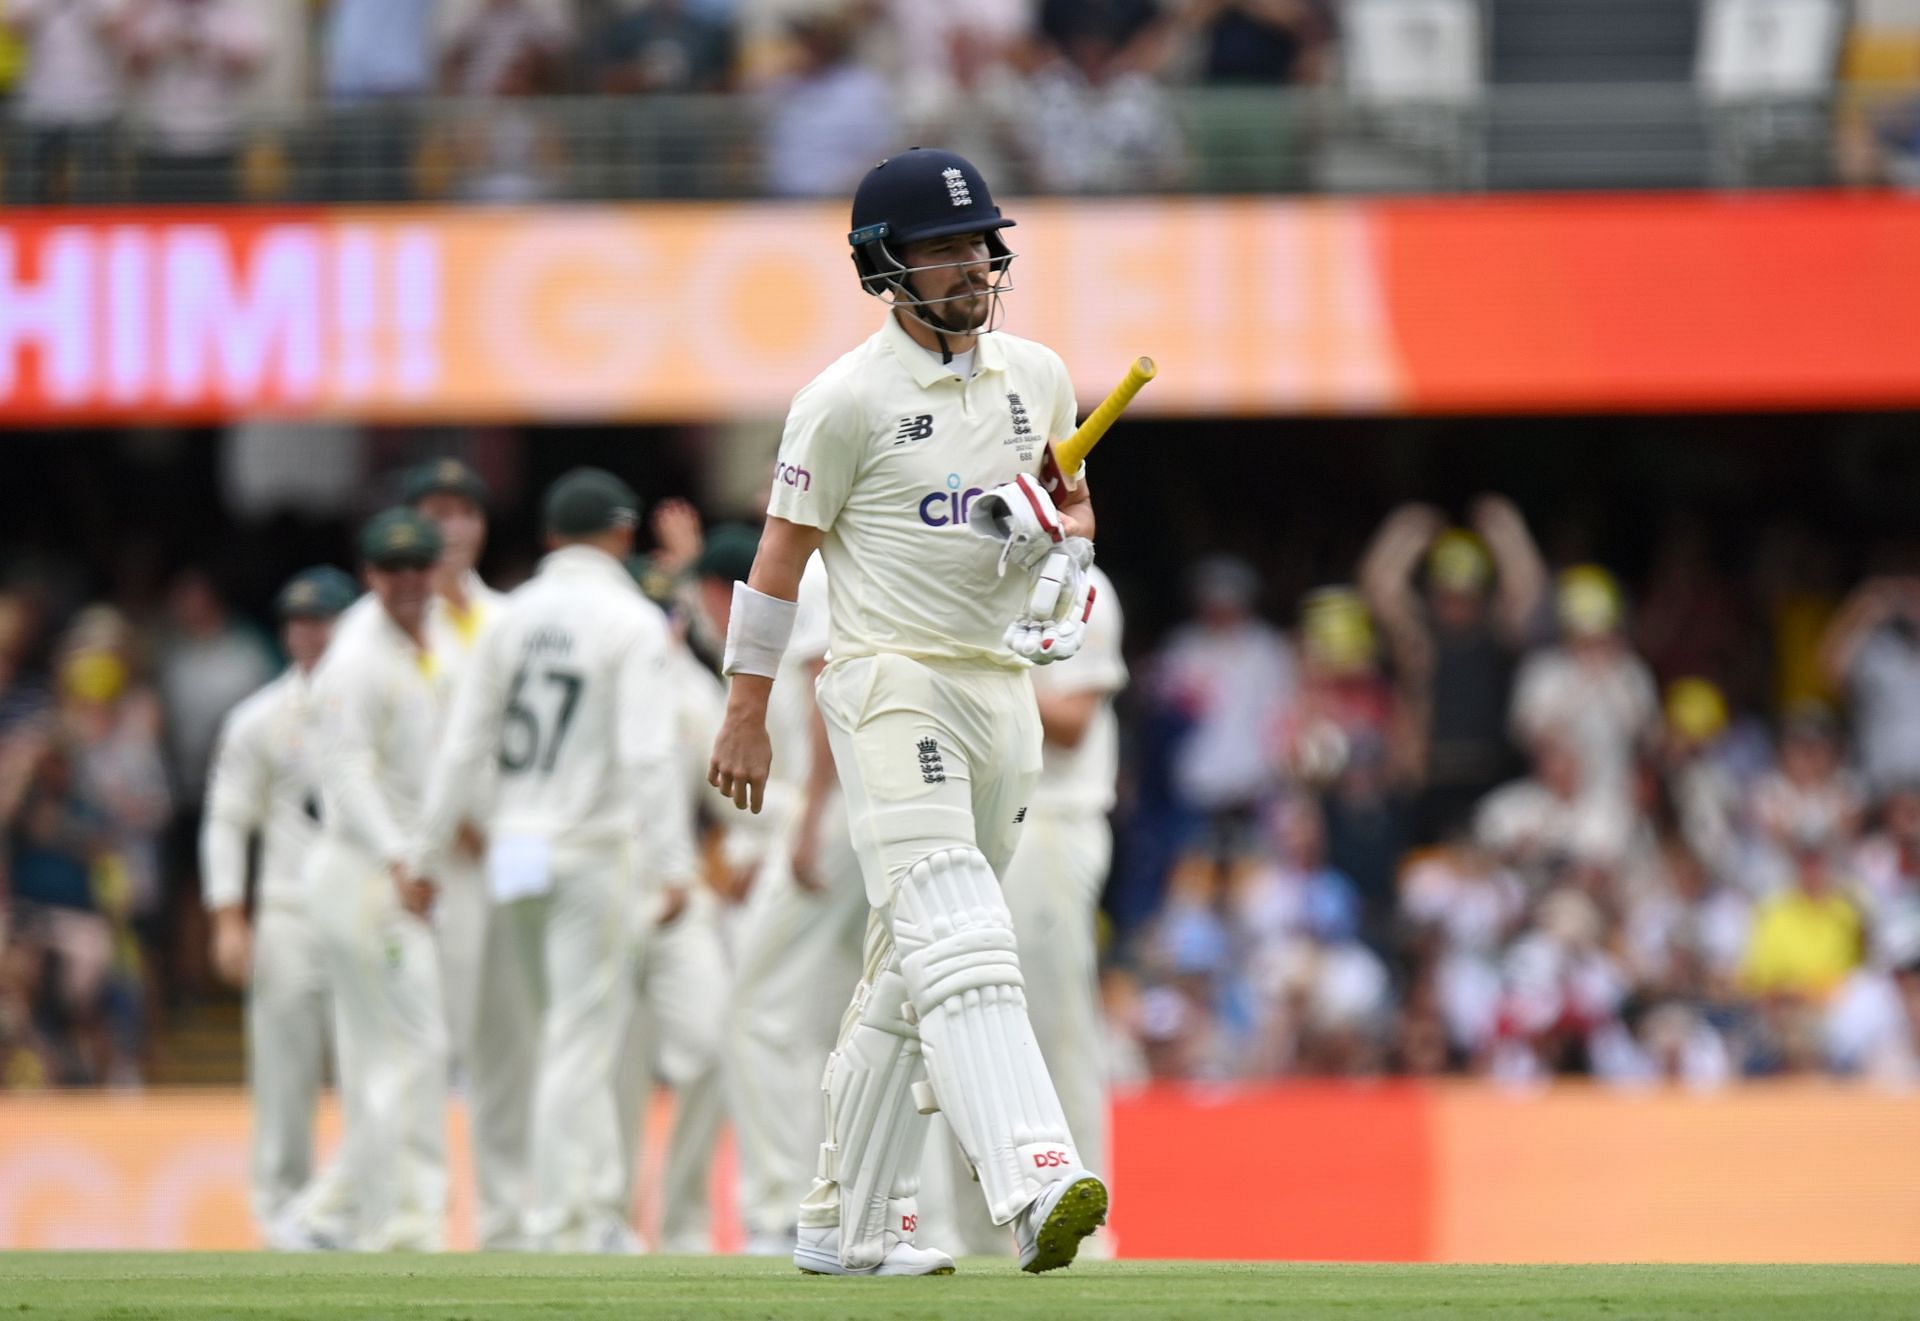 Ashes 2021 - 1st Test: Day 1: Rory Burns was bowled off the firt ball of the series as England got off to the worst possiblee start. They eventually lost by 9 wickets.